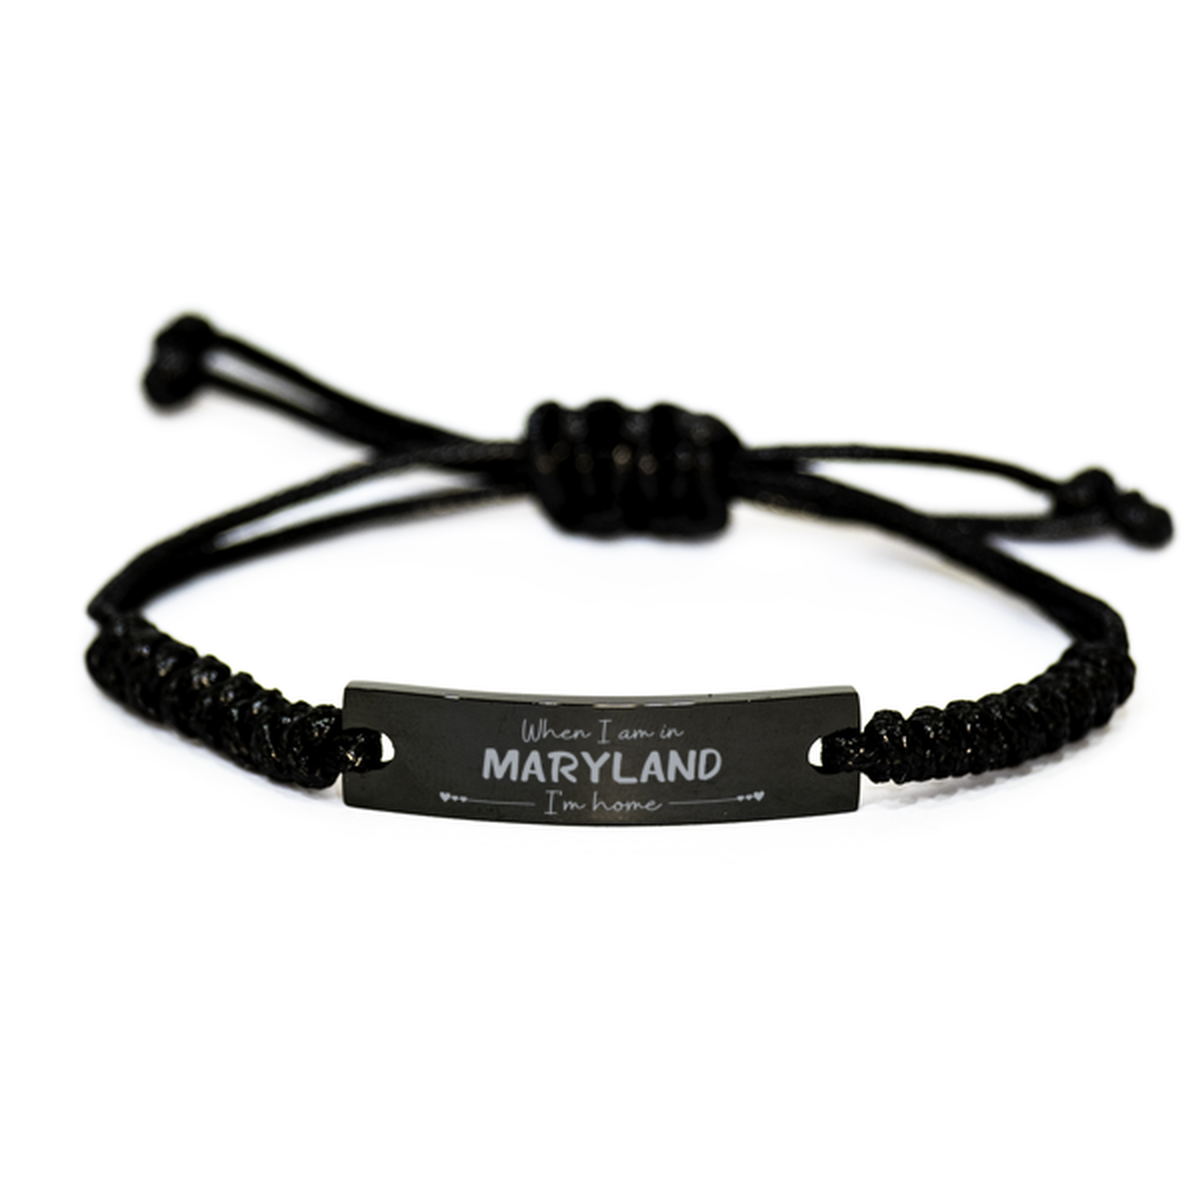 When I am in Maryland I'm home Black Rope Bracelet, Cheap Gifts For Maryland, State Maryland Birthday Gifts for Friends Coworker